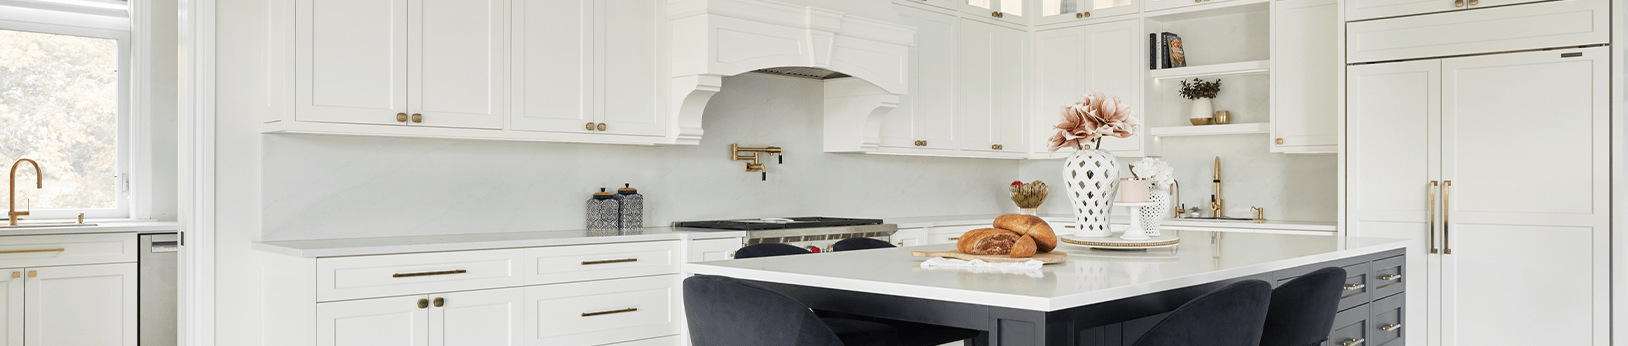 white traditional custom kitchen design with white cabinetry and a marble countertop island with black cabinets